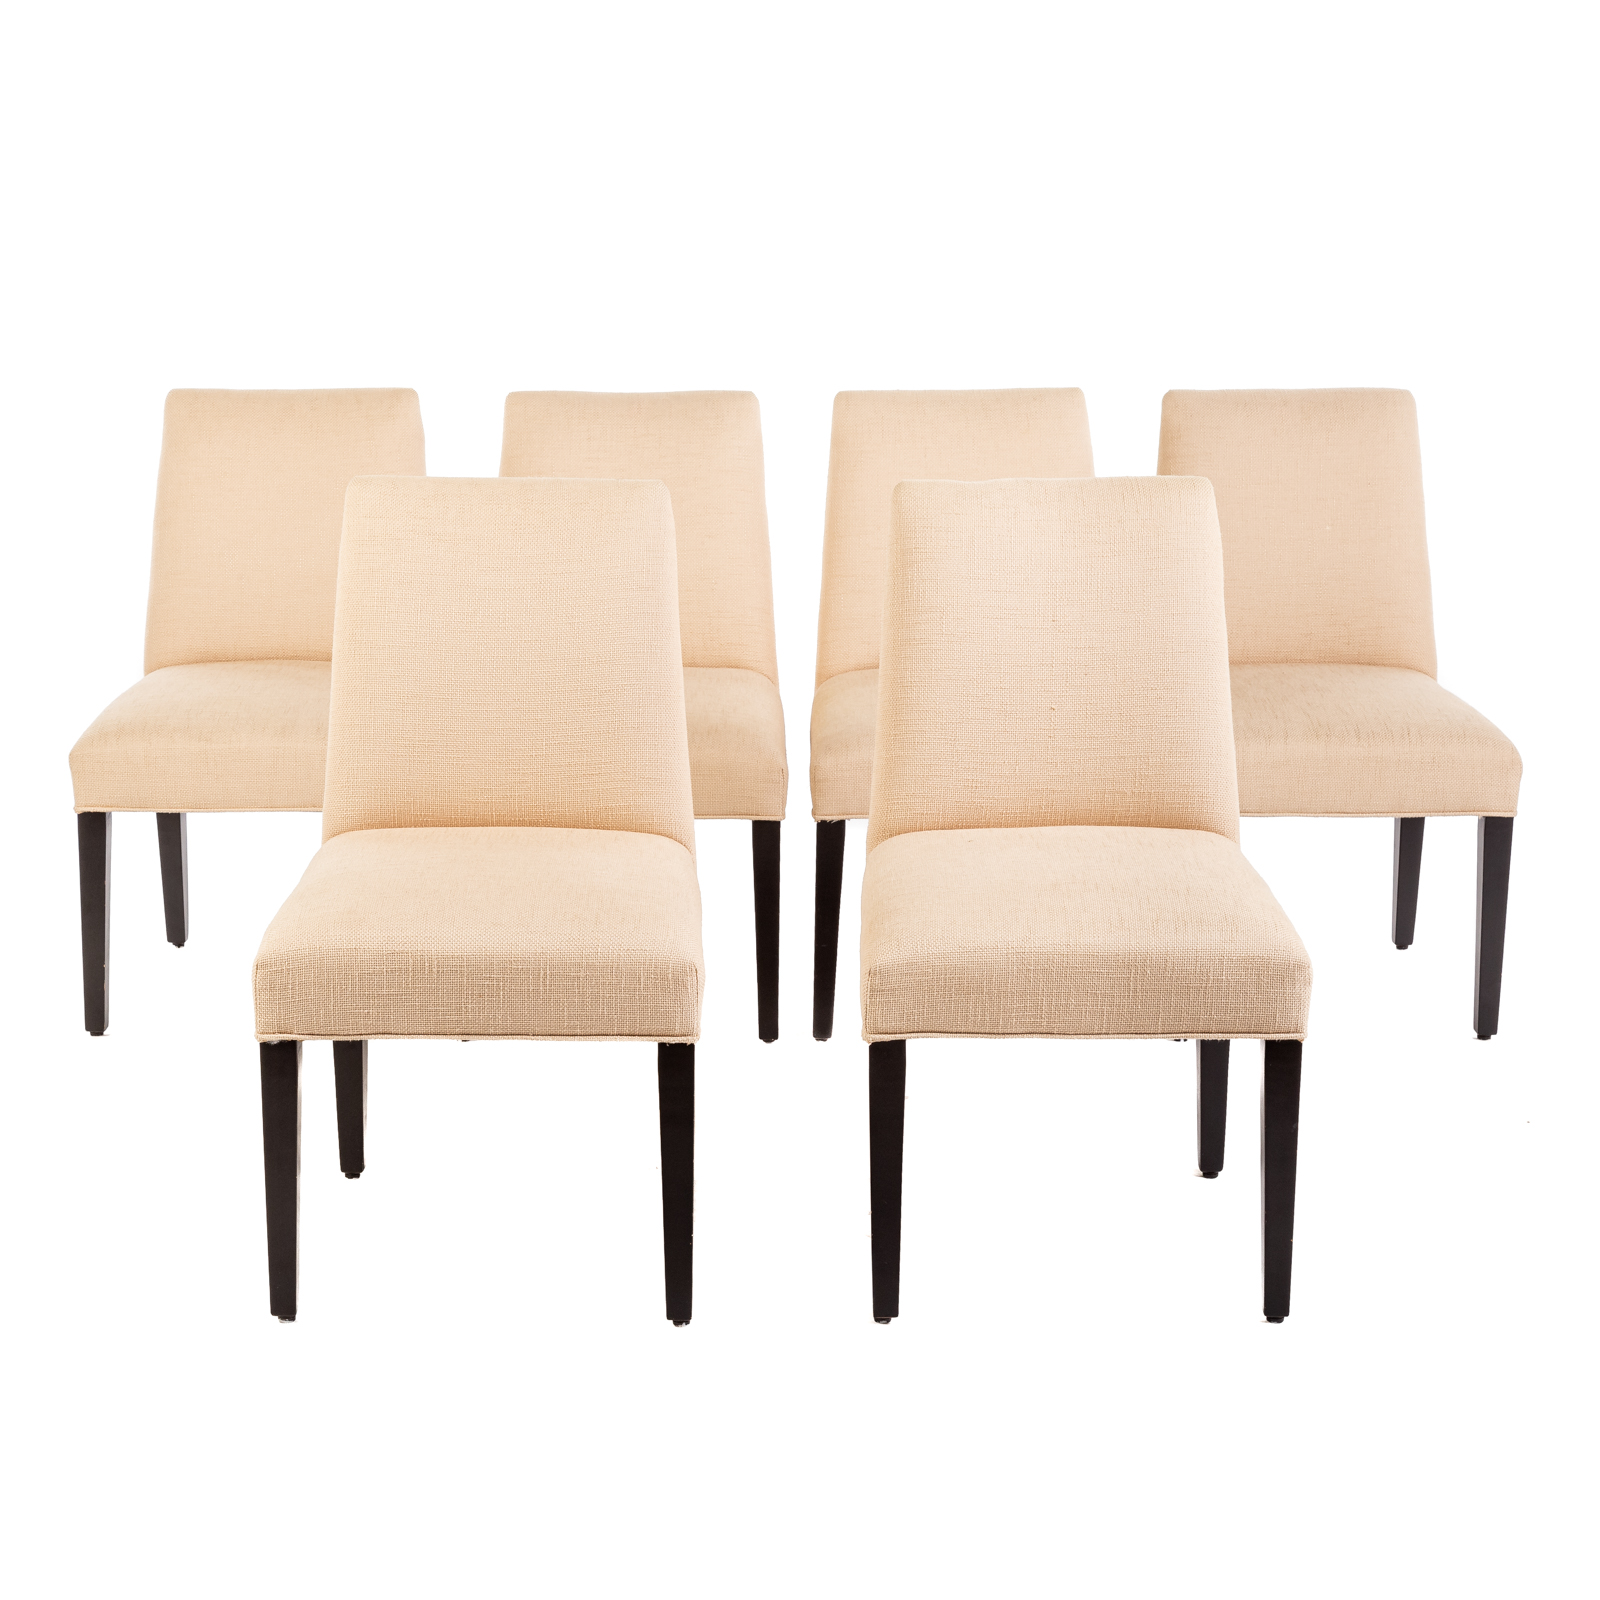 SIX CONTEMPORARY UPHOLSTERED DINING 36a98c